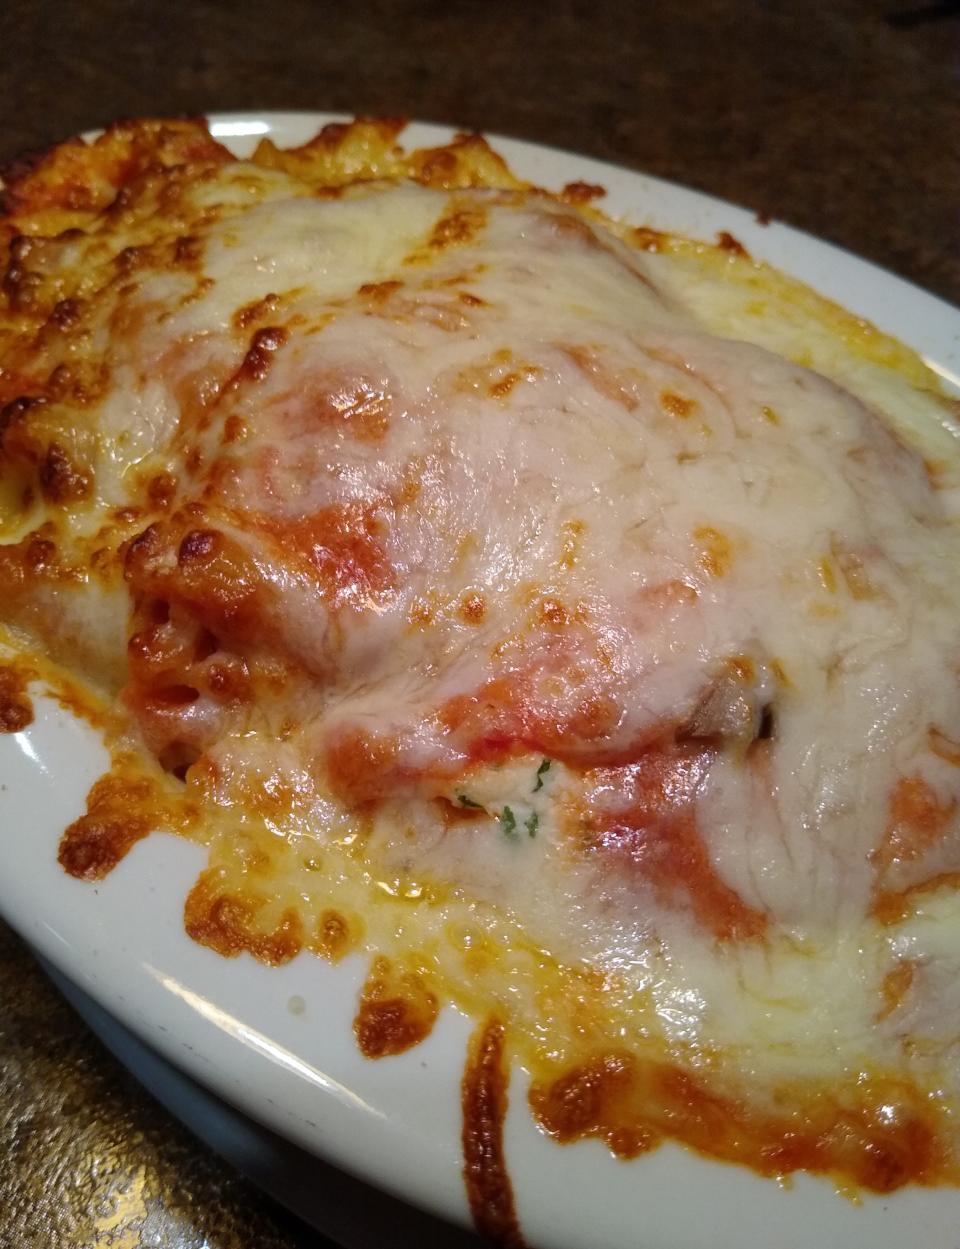 Casa D’Angelo’s Penne E. Formaggi is a baked dish of ricotta, Parmesan, provolone and mozzarella folded into pasta and served with homemade meat sauce.